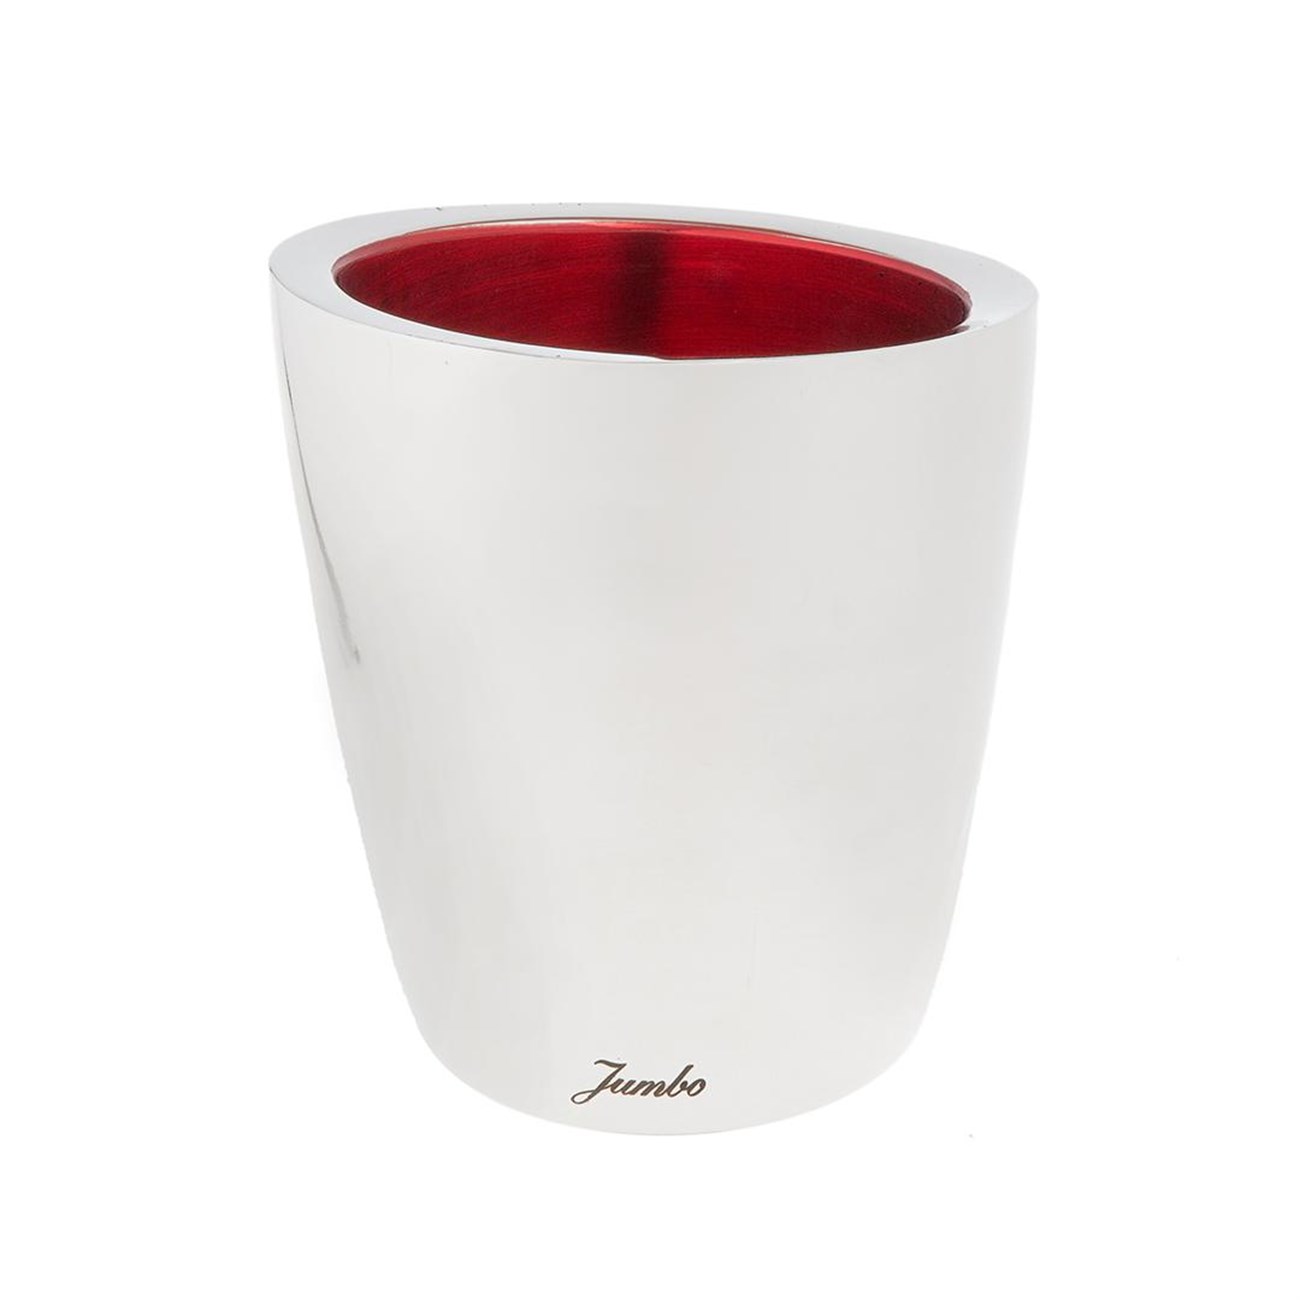 Marsel Double Wall Buz Kovası 15 Cm Red and Silver Clr